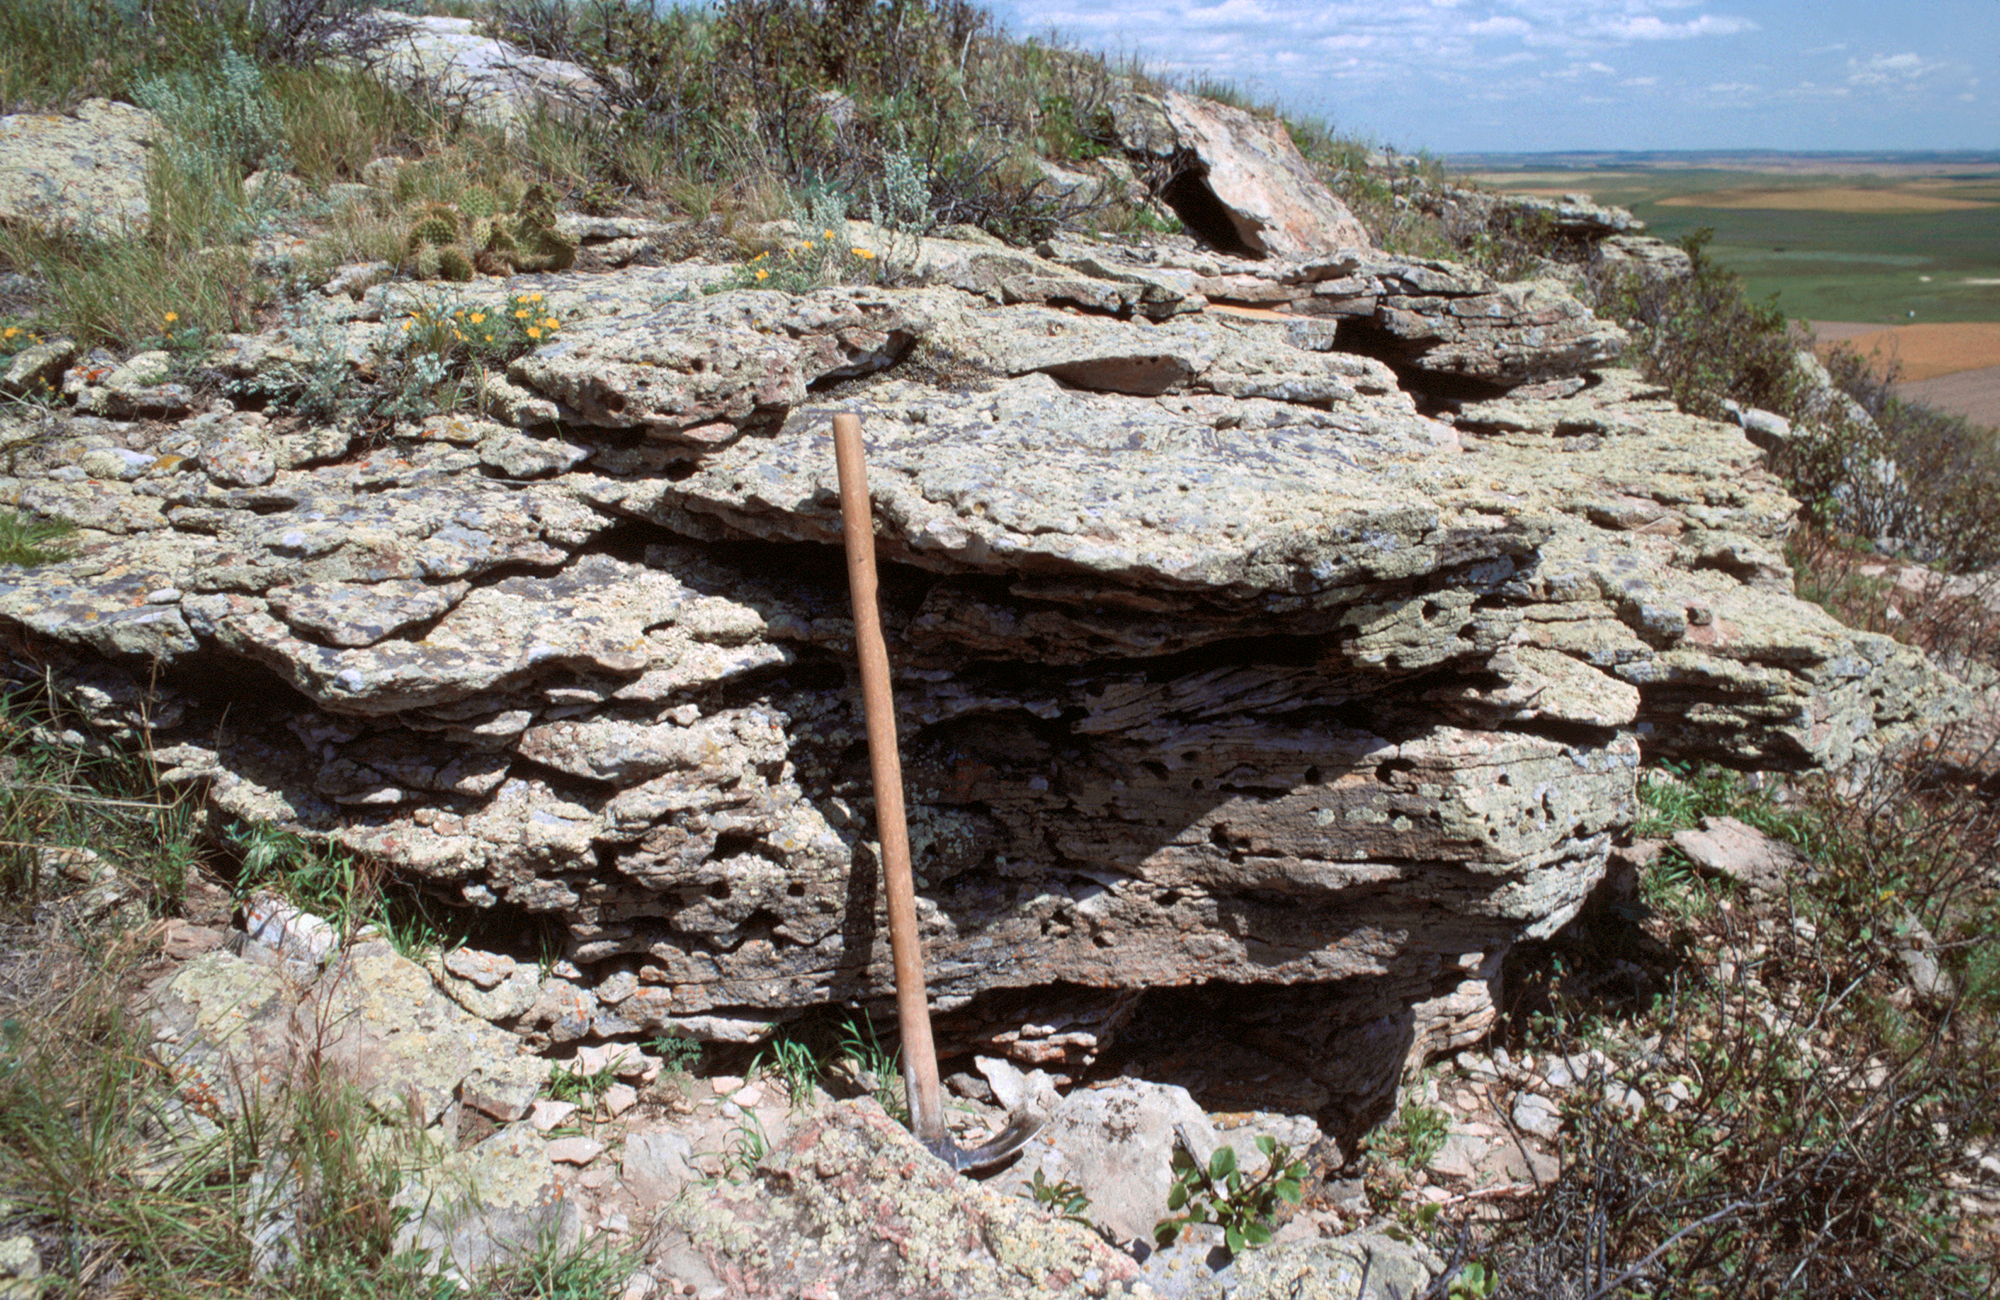 A photo of a pick axe leaning against a rock formation.